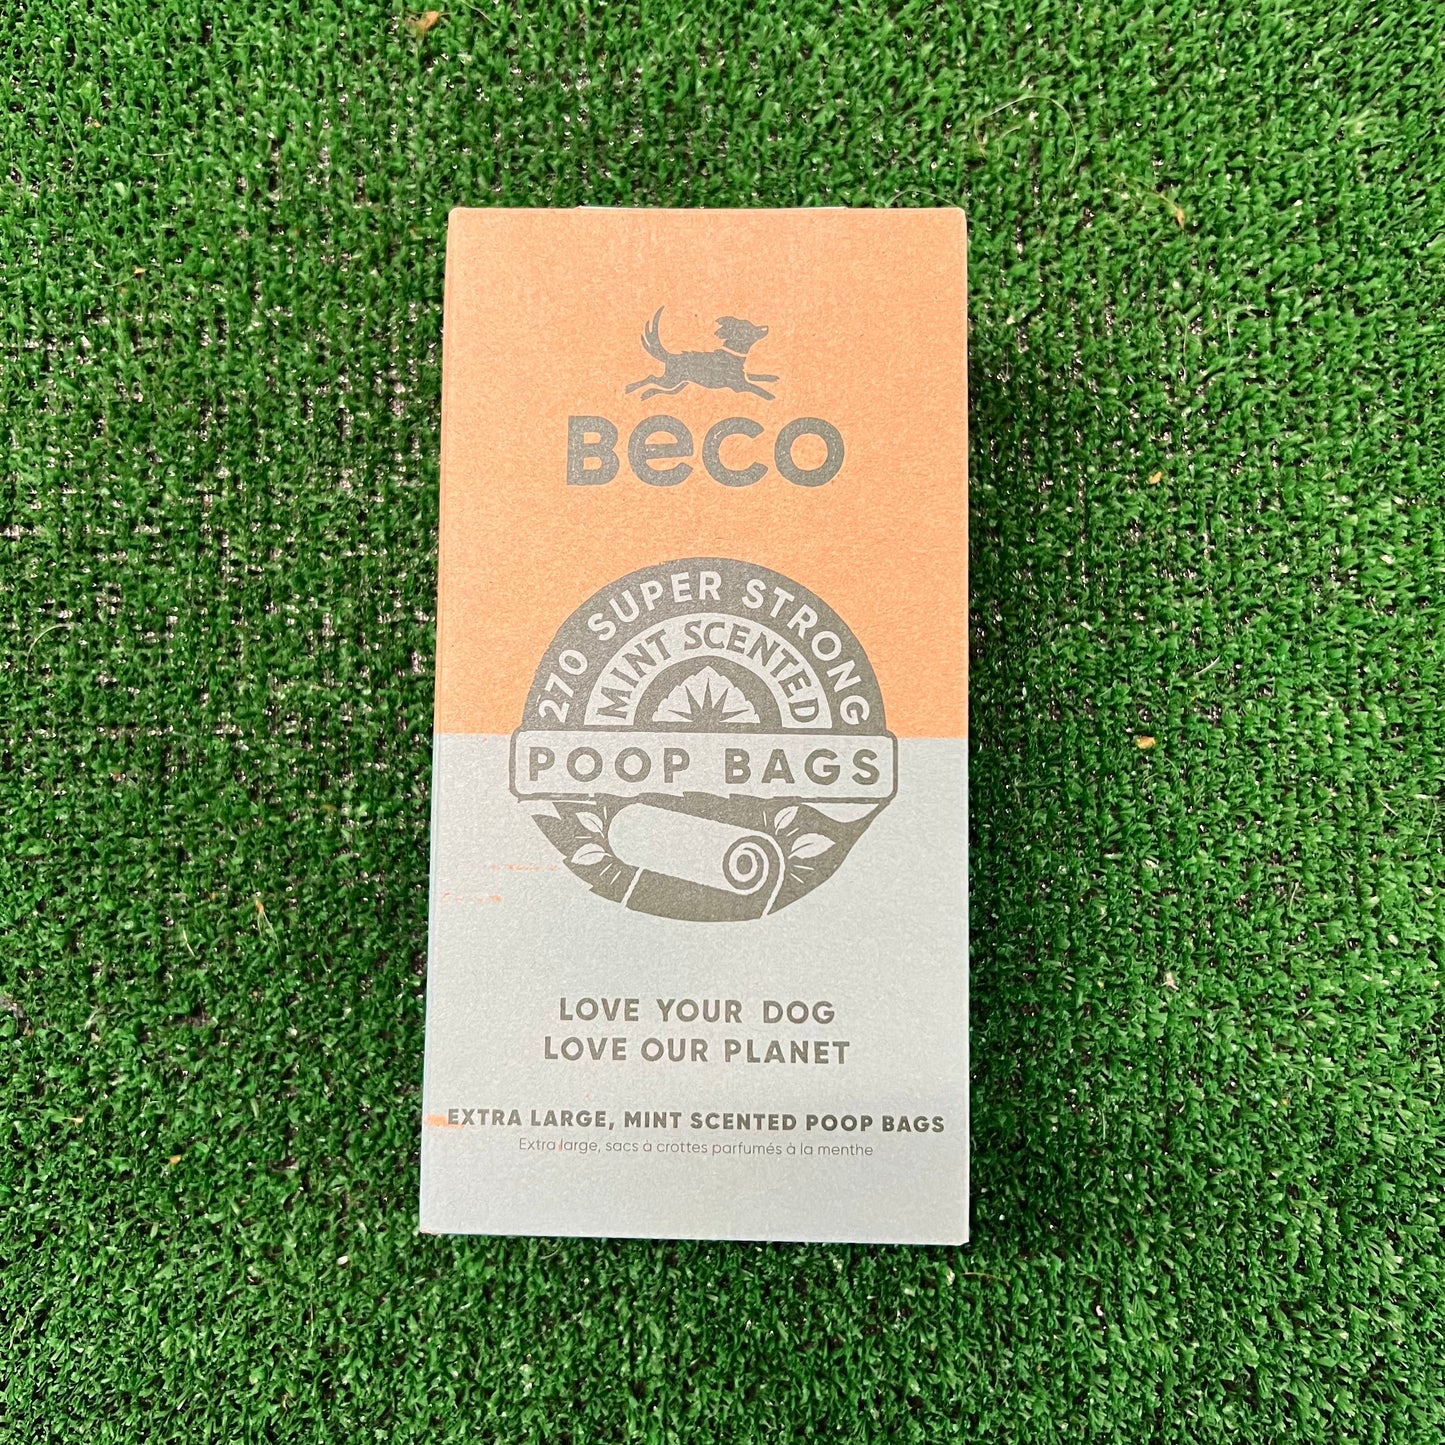 Beco 270 Extra Large mint scented bags - 100% natural, free from raw hide & any hidden nasties.